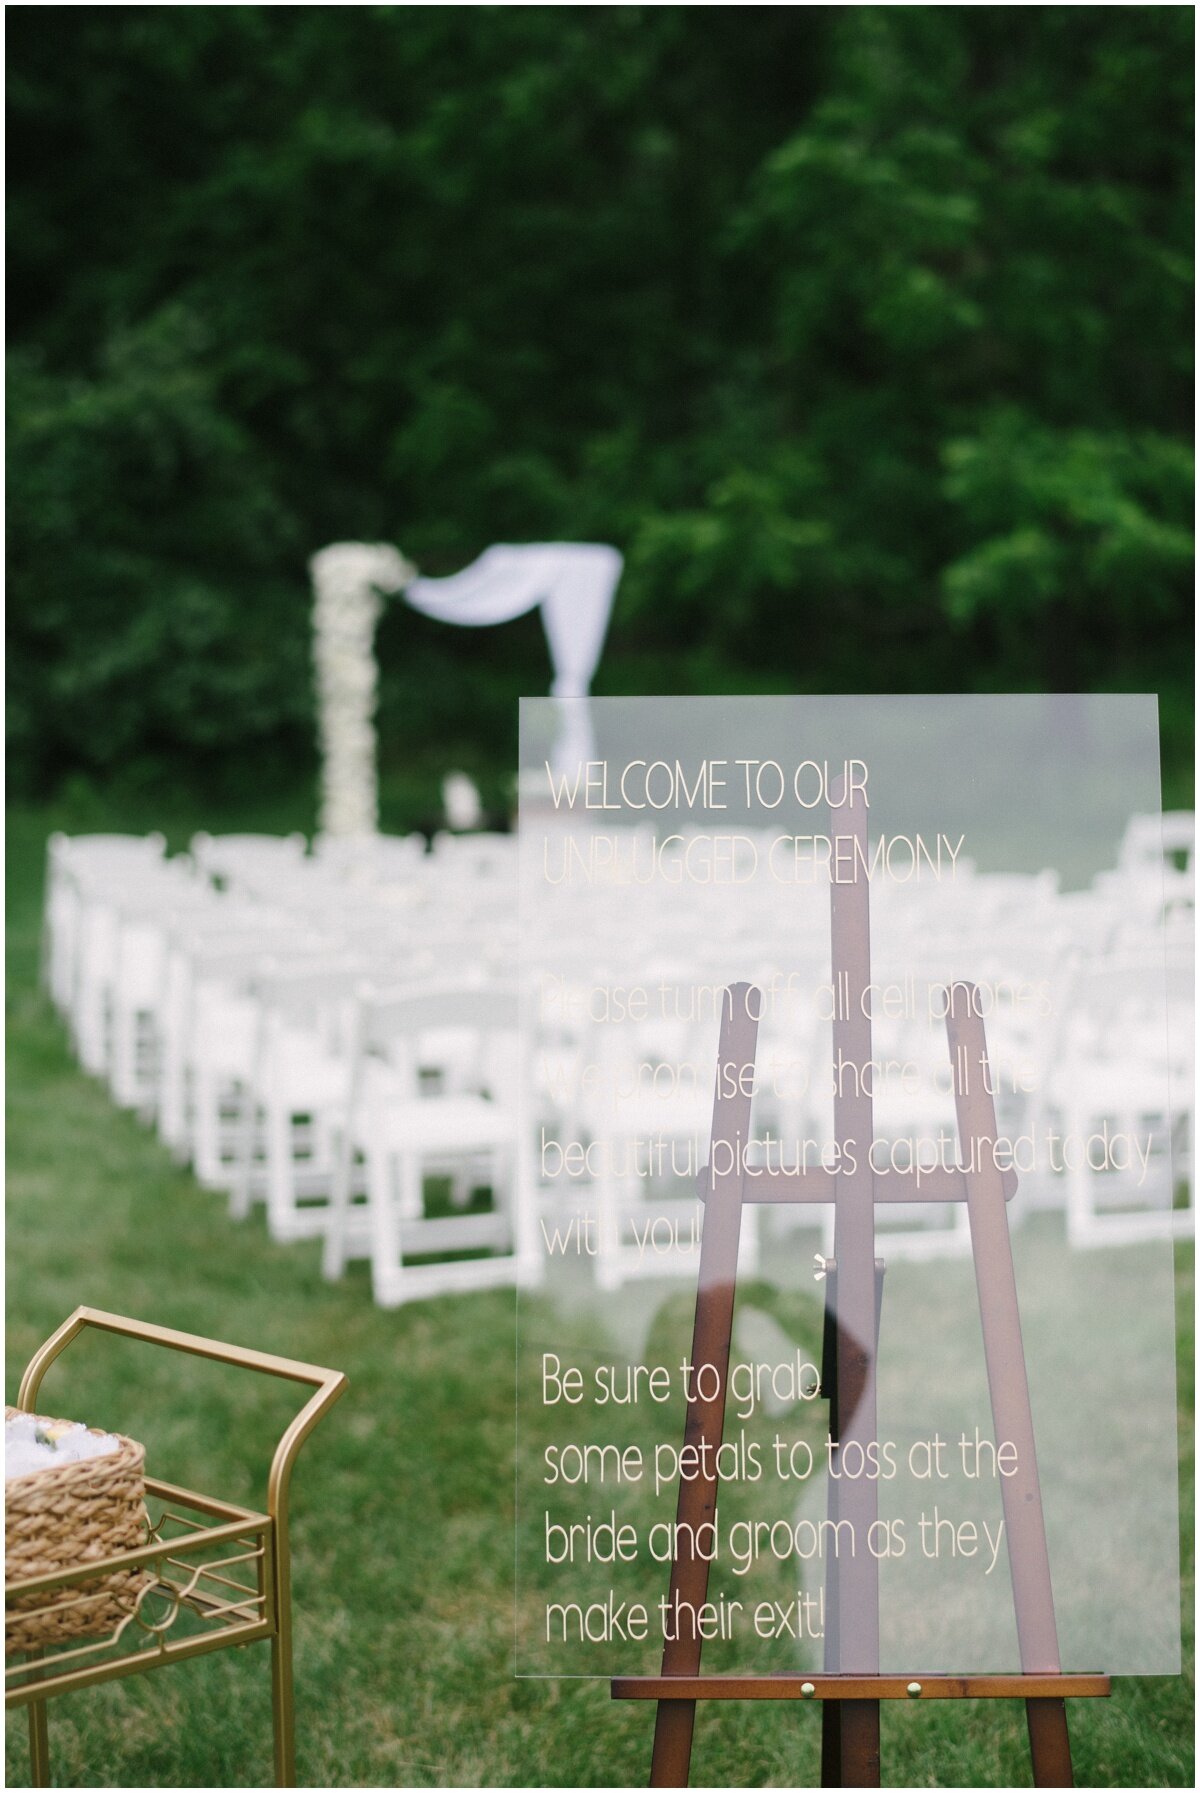  Outdoor wedding ceremony clear signage during private estate wedding 